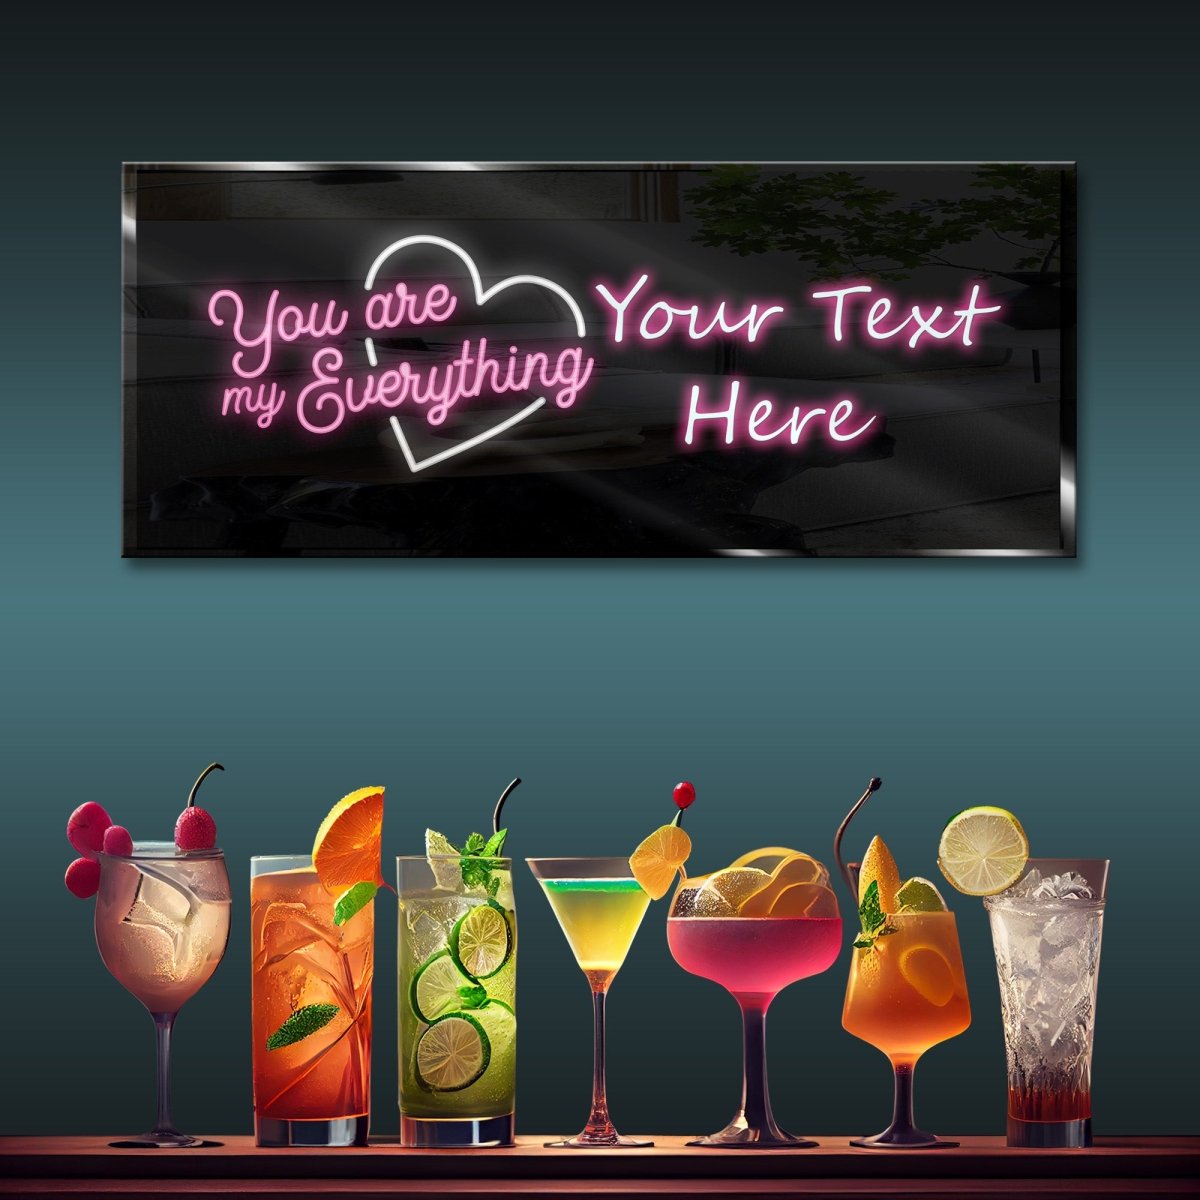 Personalized Neon Sign You are my Everything - madaboutneon